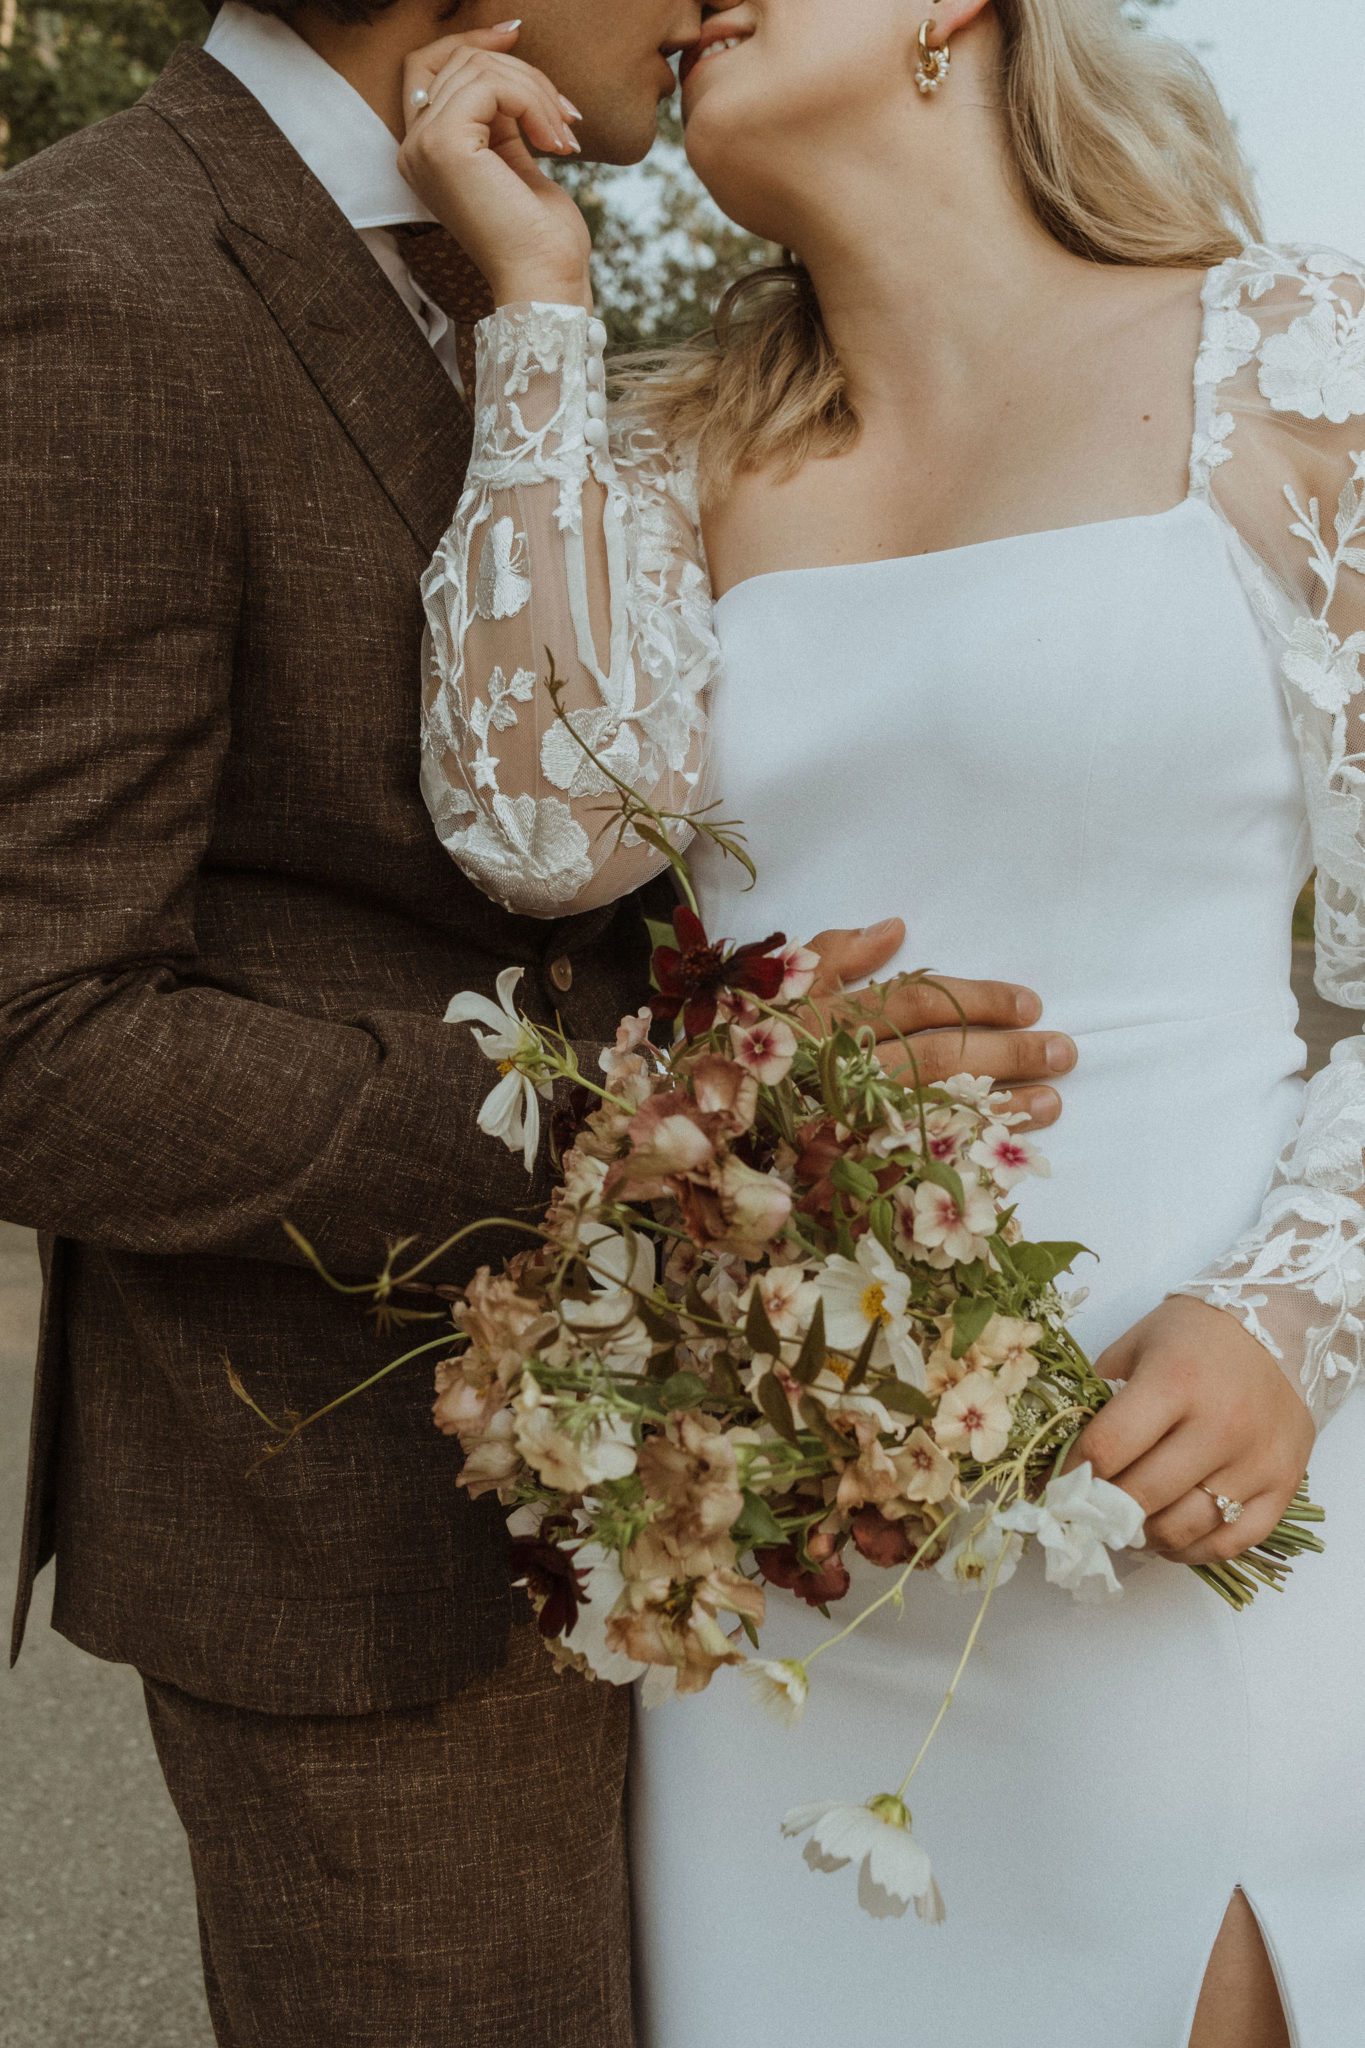 Bridal bouquet inspiration with dusty pink flowers, cottage core wedding inspiration